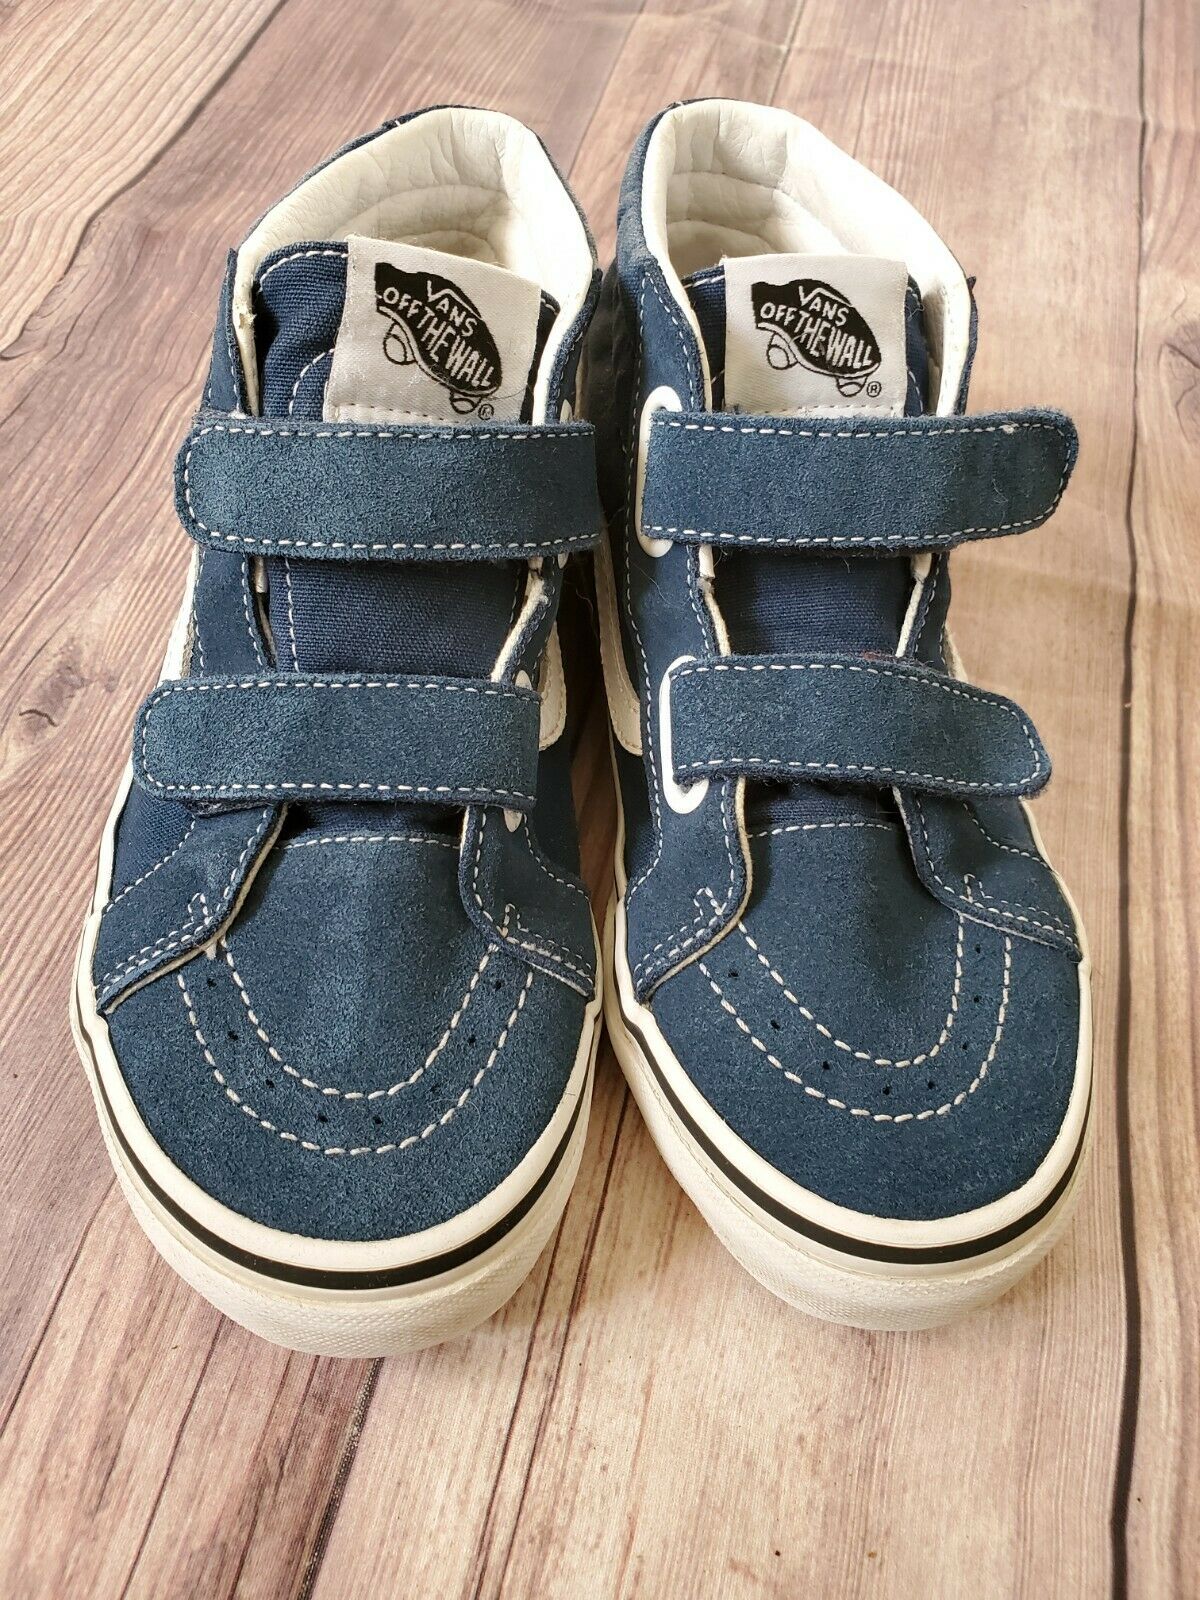 VANS SK8-Mid Blue and white shoes Athletic Casual Hook And Loop Kids sz 3